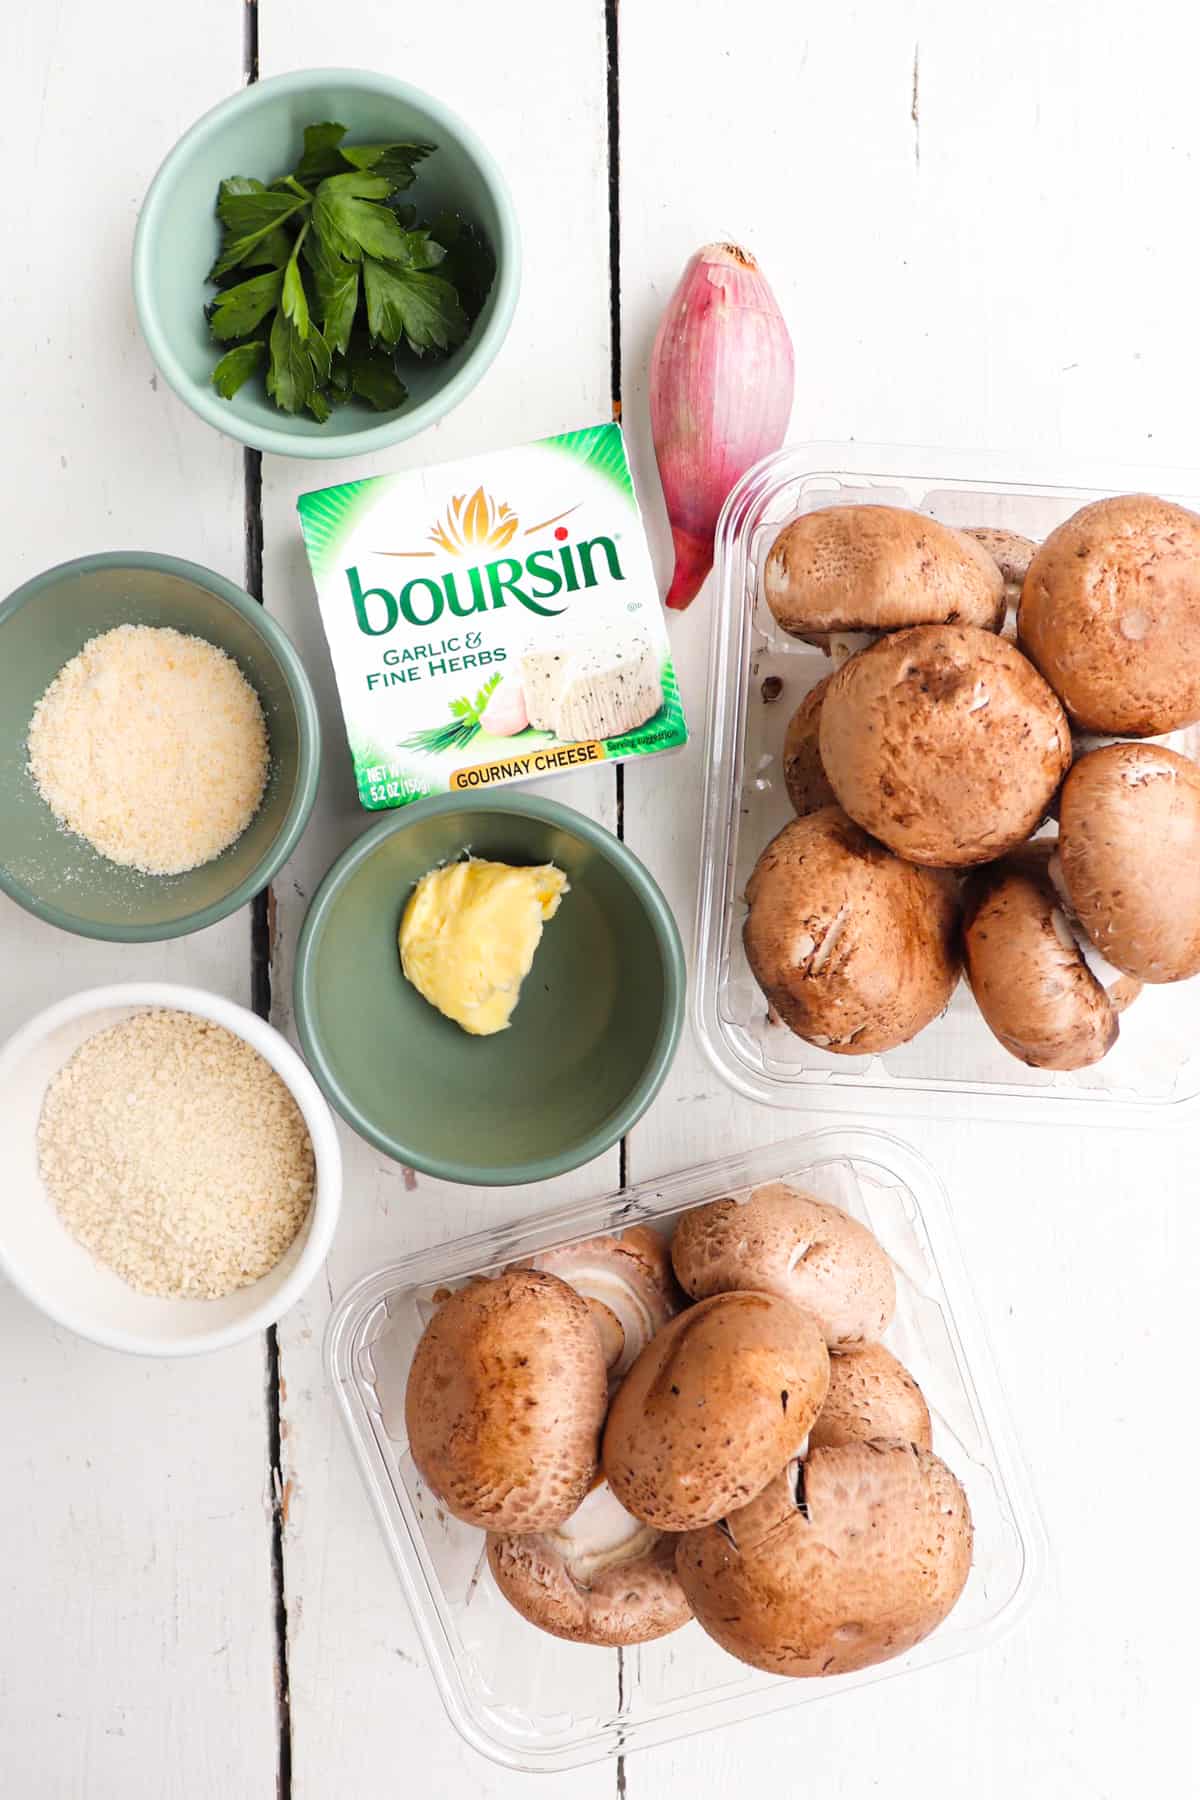 ingredients for boursin cheese stuffed mushrooms on a white background.